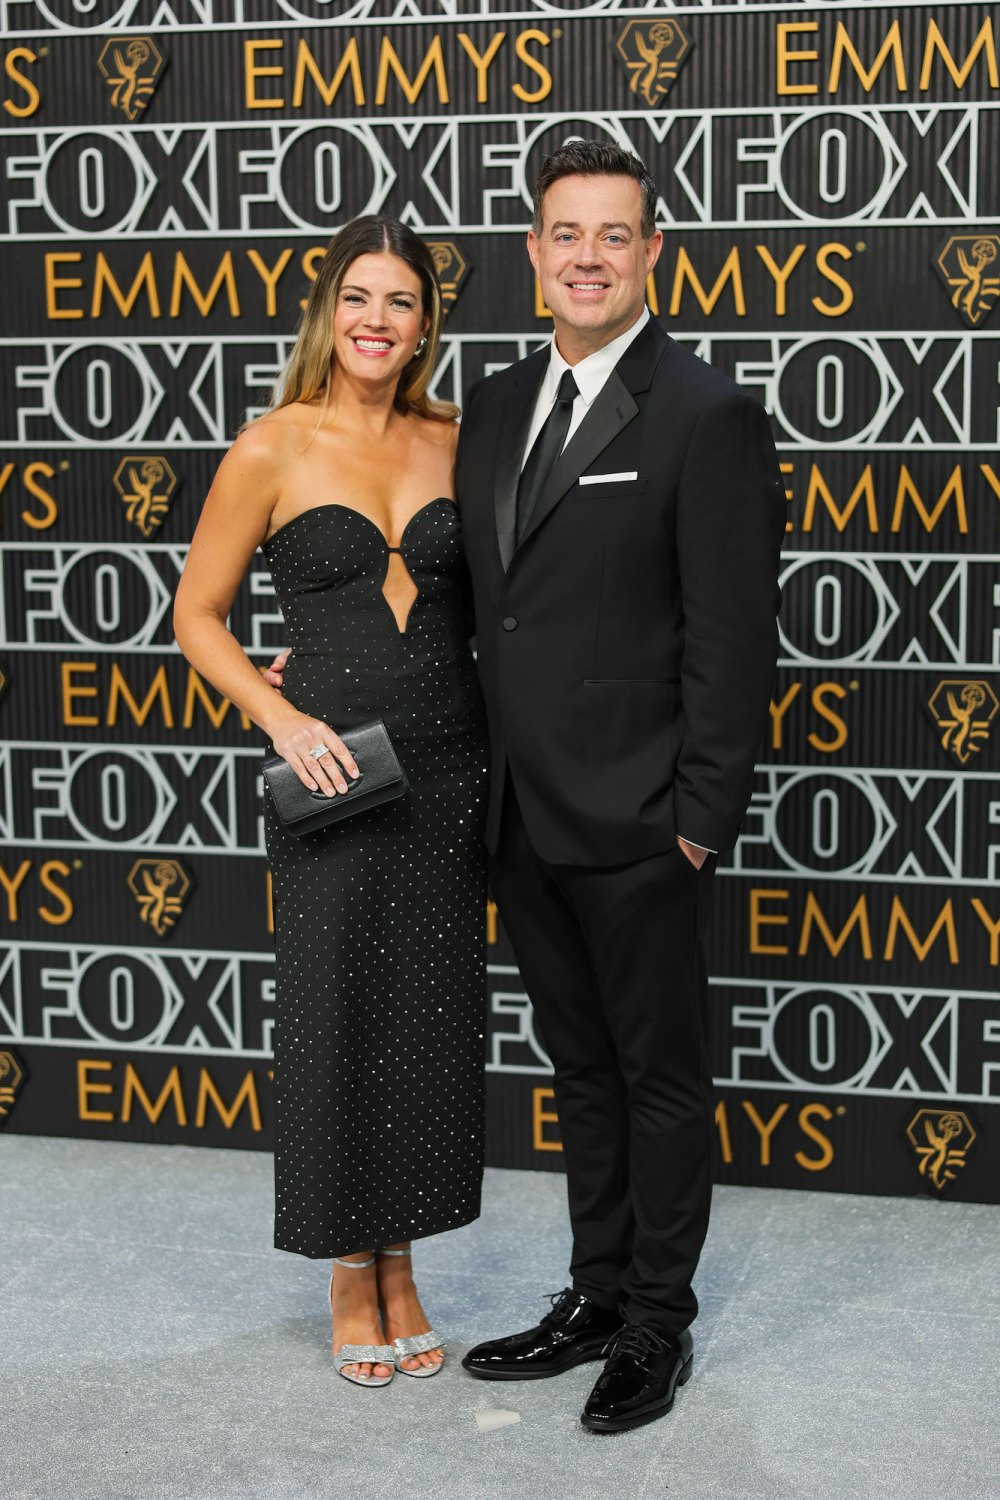 Carson Daly Says He and Wife Siri Pinter Sleep in Separate Beds